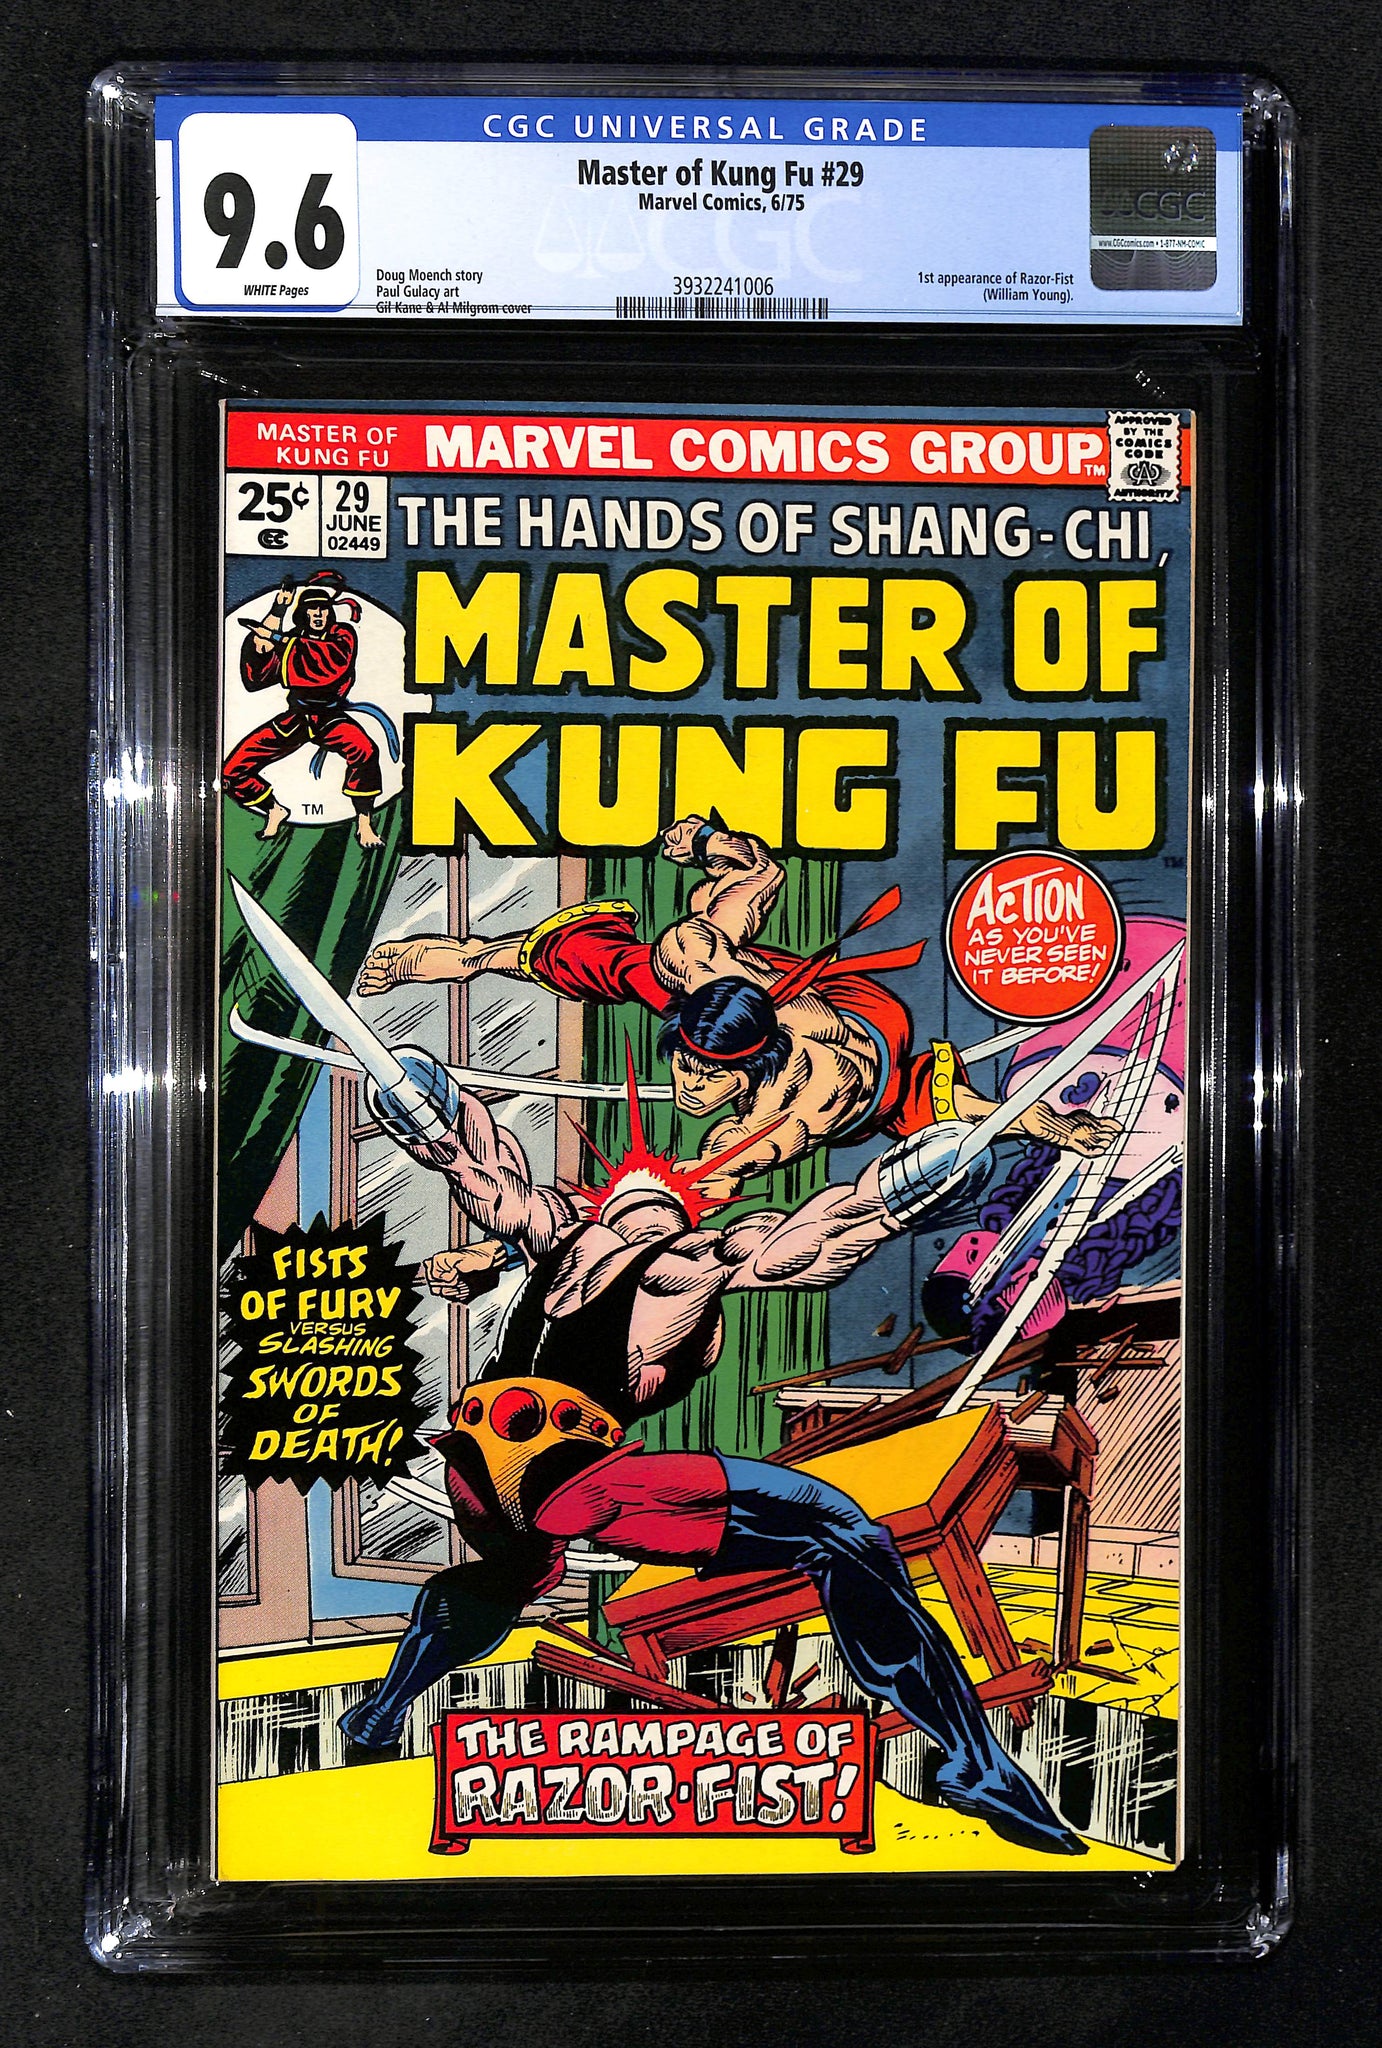 Master of Kung Fu #29 CGC 9.6 1st appearance of Razor-Fist